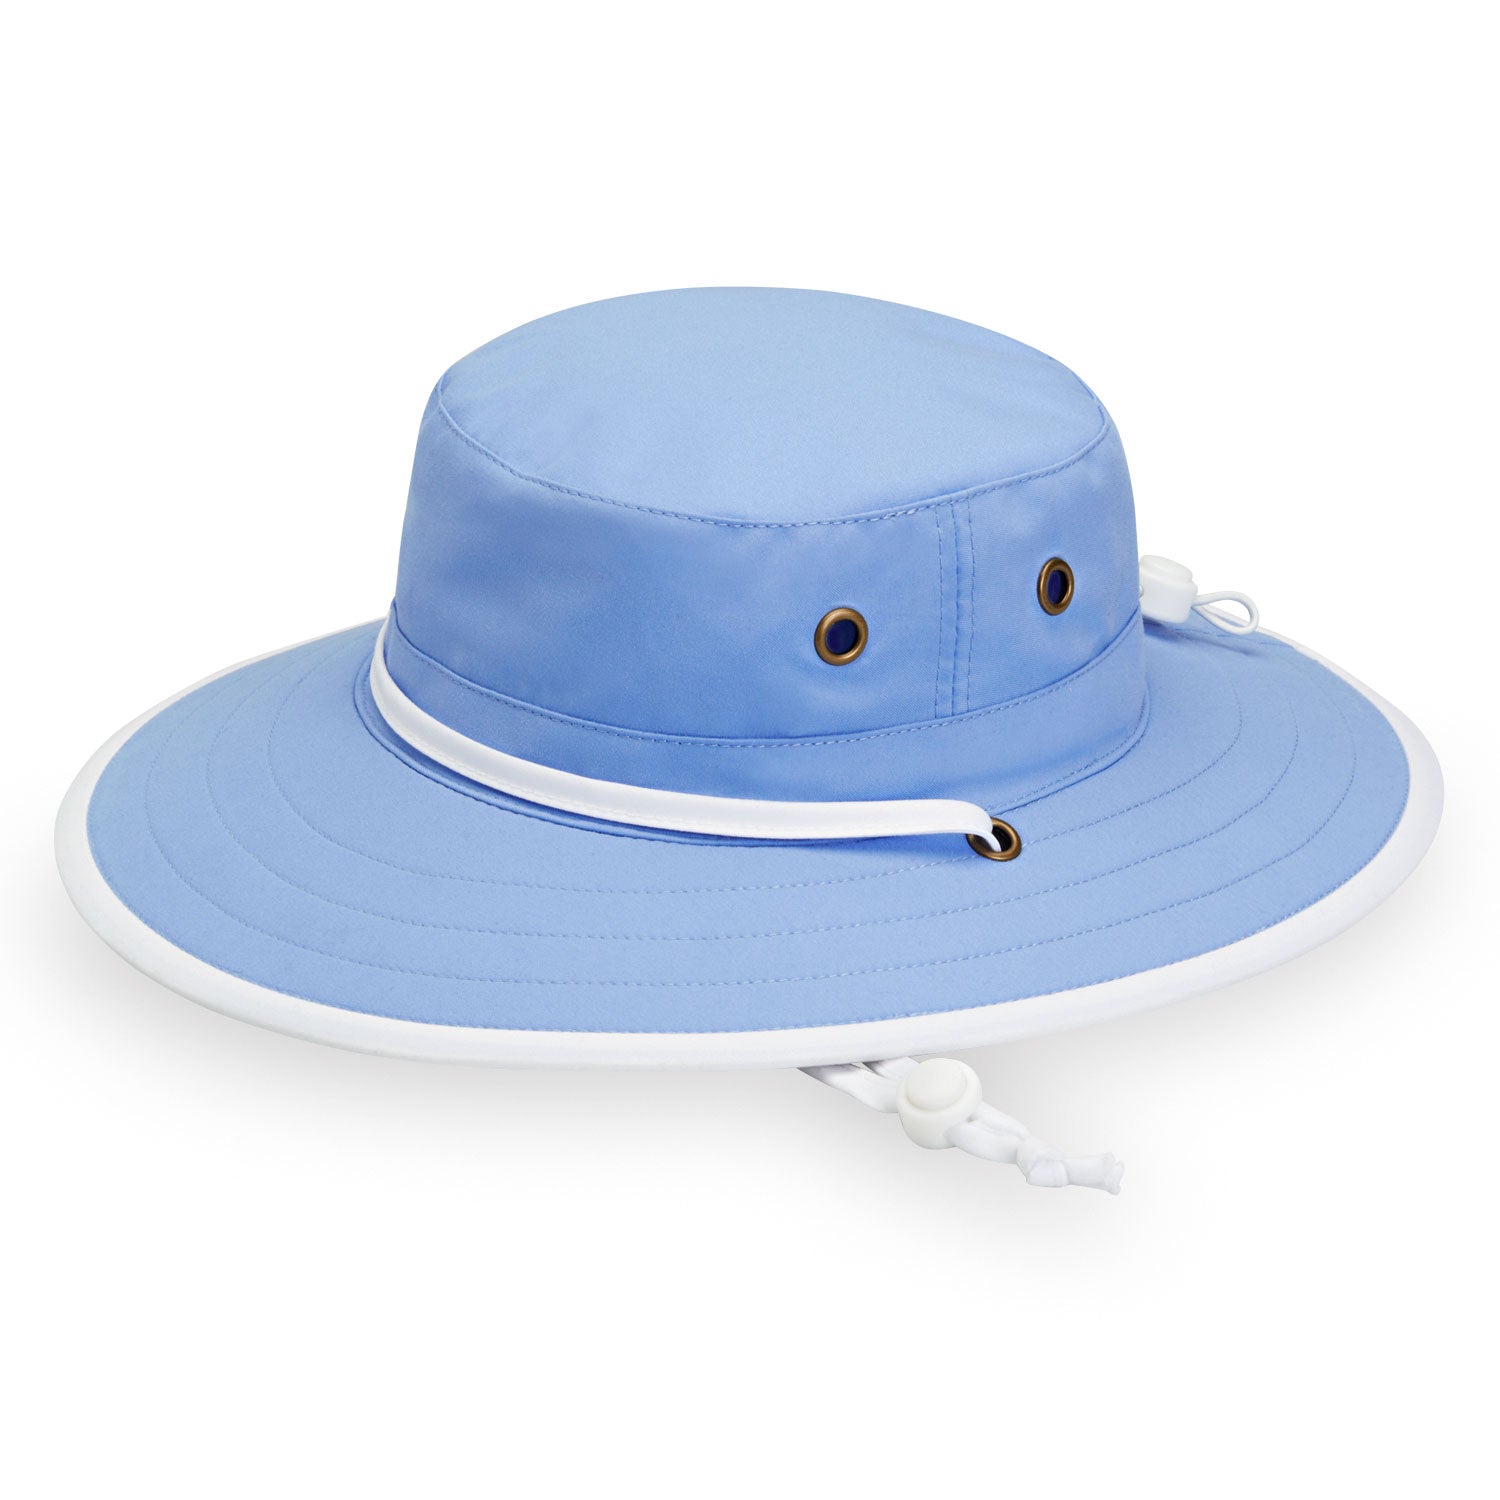 Featuring Kid's Adjustable Jr. Explorer Bucket Style UPF Sun Hat with Chinstrap in Hydrangea from Wallaroo